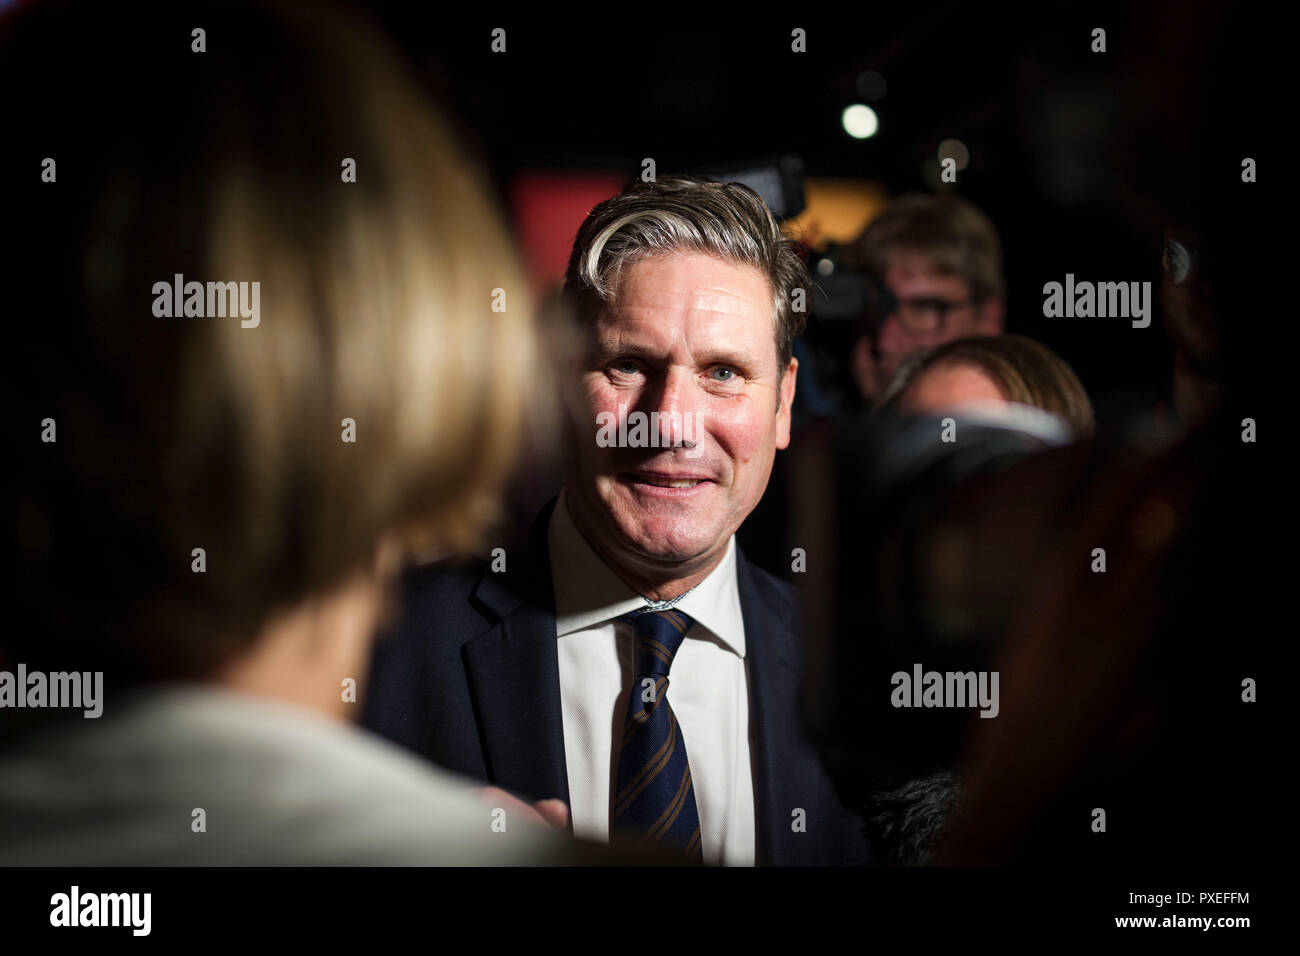 © Chris Bull. 26/9/18   LIVERPOOL   , UK.   The Labour Party Conference today (WEDNESDAY 26th Septeber 2018).  Shadow Secretary of State for Exiting the European Union Keir Starmer MP is questioned by journalists as he leaves the conference hall follwing Leader of the Labour Party Jeremy Corbyn's speech. There have been calls for him to clarify Labour's Brexit policy after his speech contradicted some of what John McDonnell has said.    Photo credit: CHRIS BULL Stock Photo